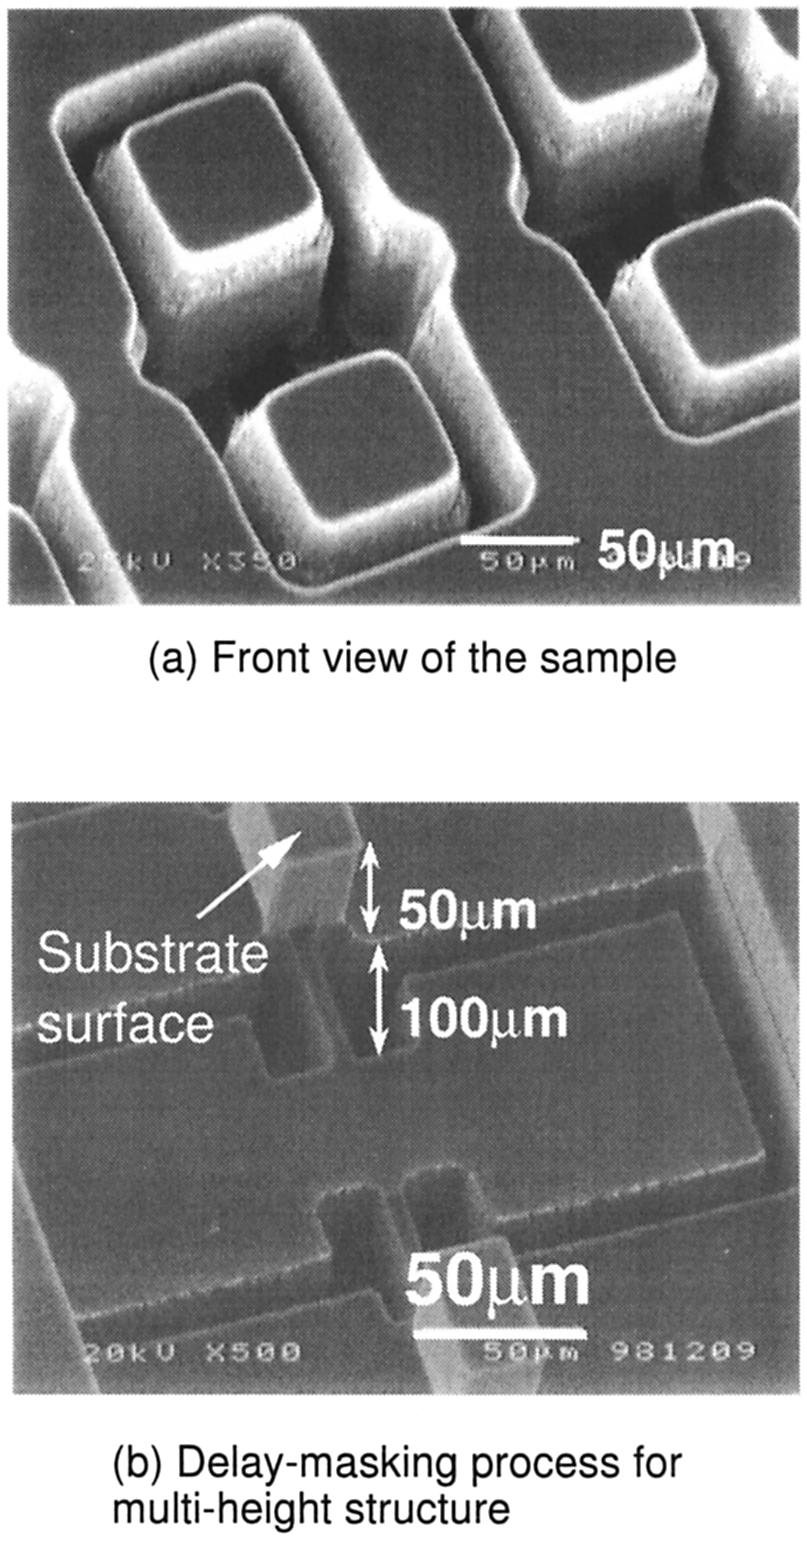 After patterning the layer by photomask-1, aluminum layer was deposited by vacuum evaporation and patterned by photomask-2.